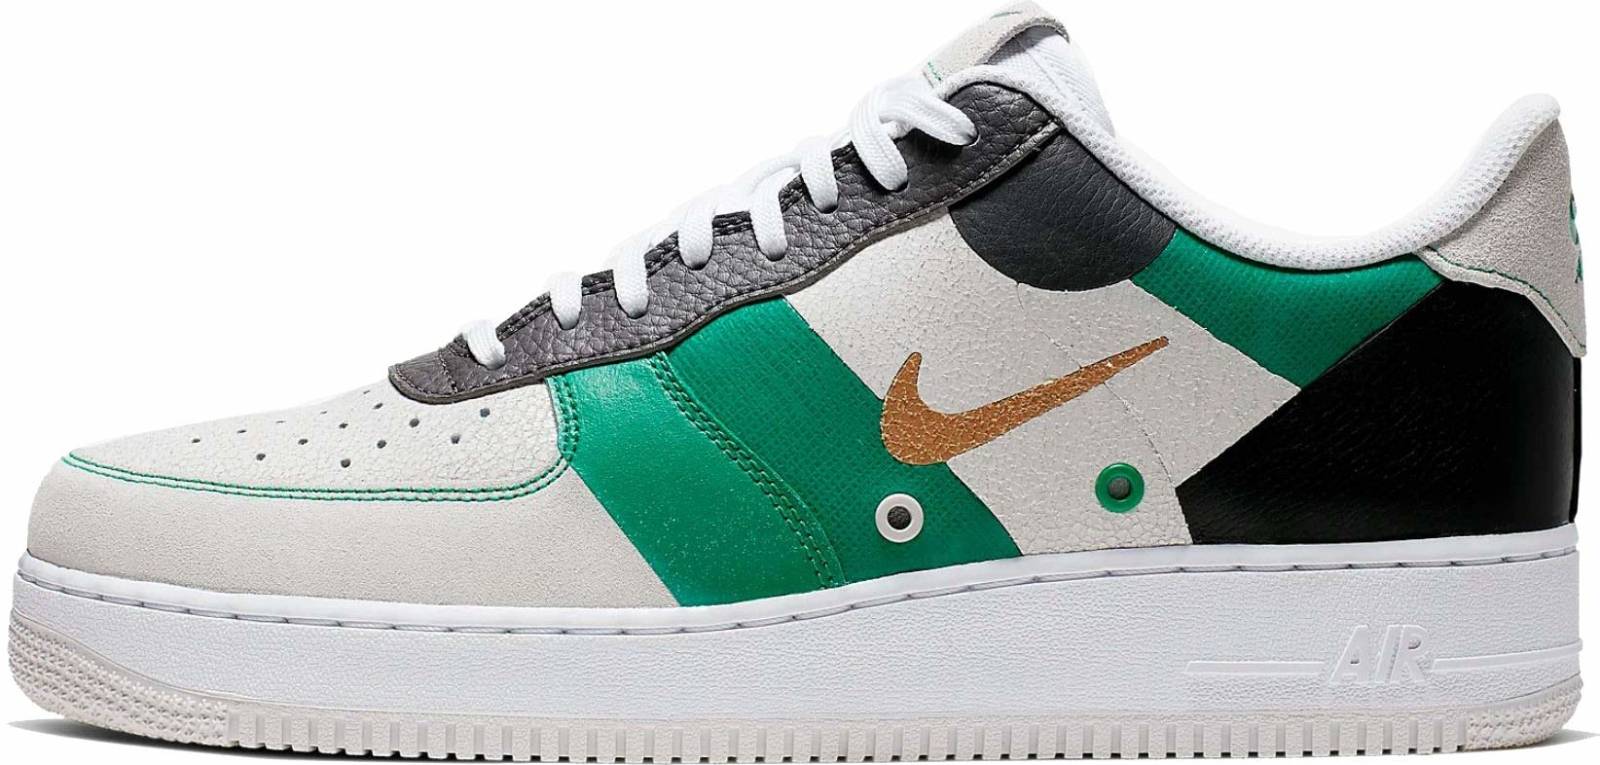 green and gold air force ones